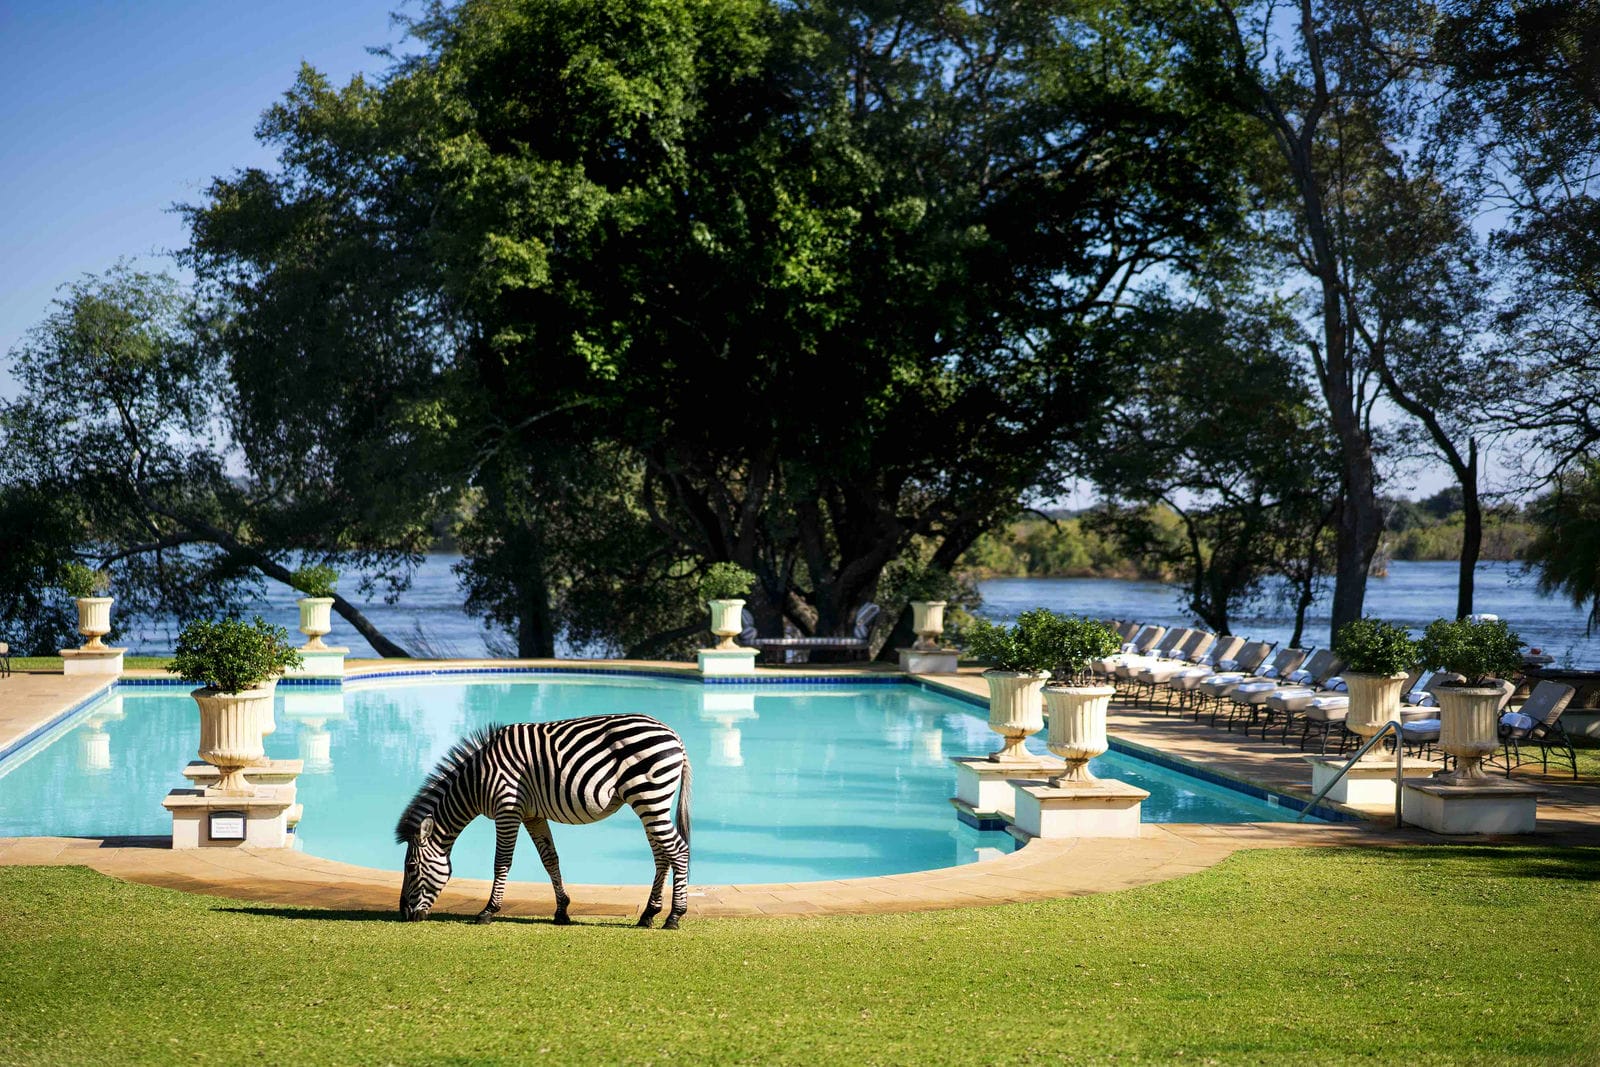 Leisure -Pool with view and Zebra